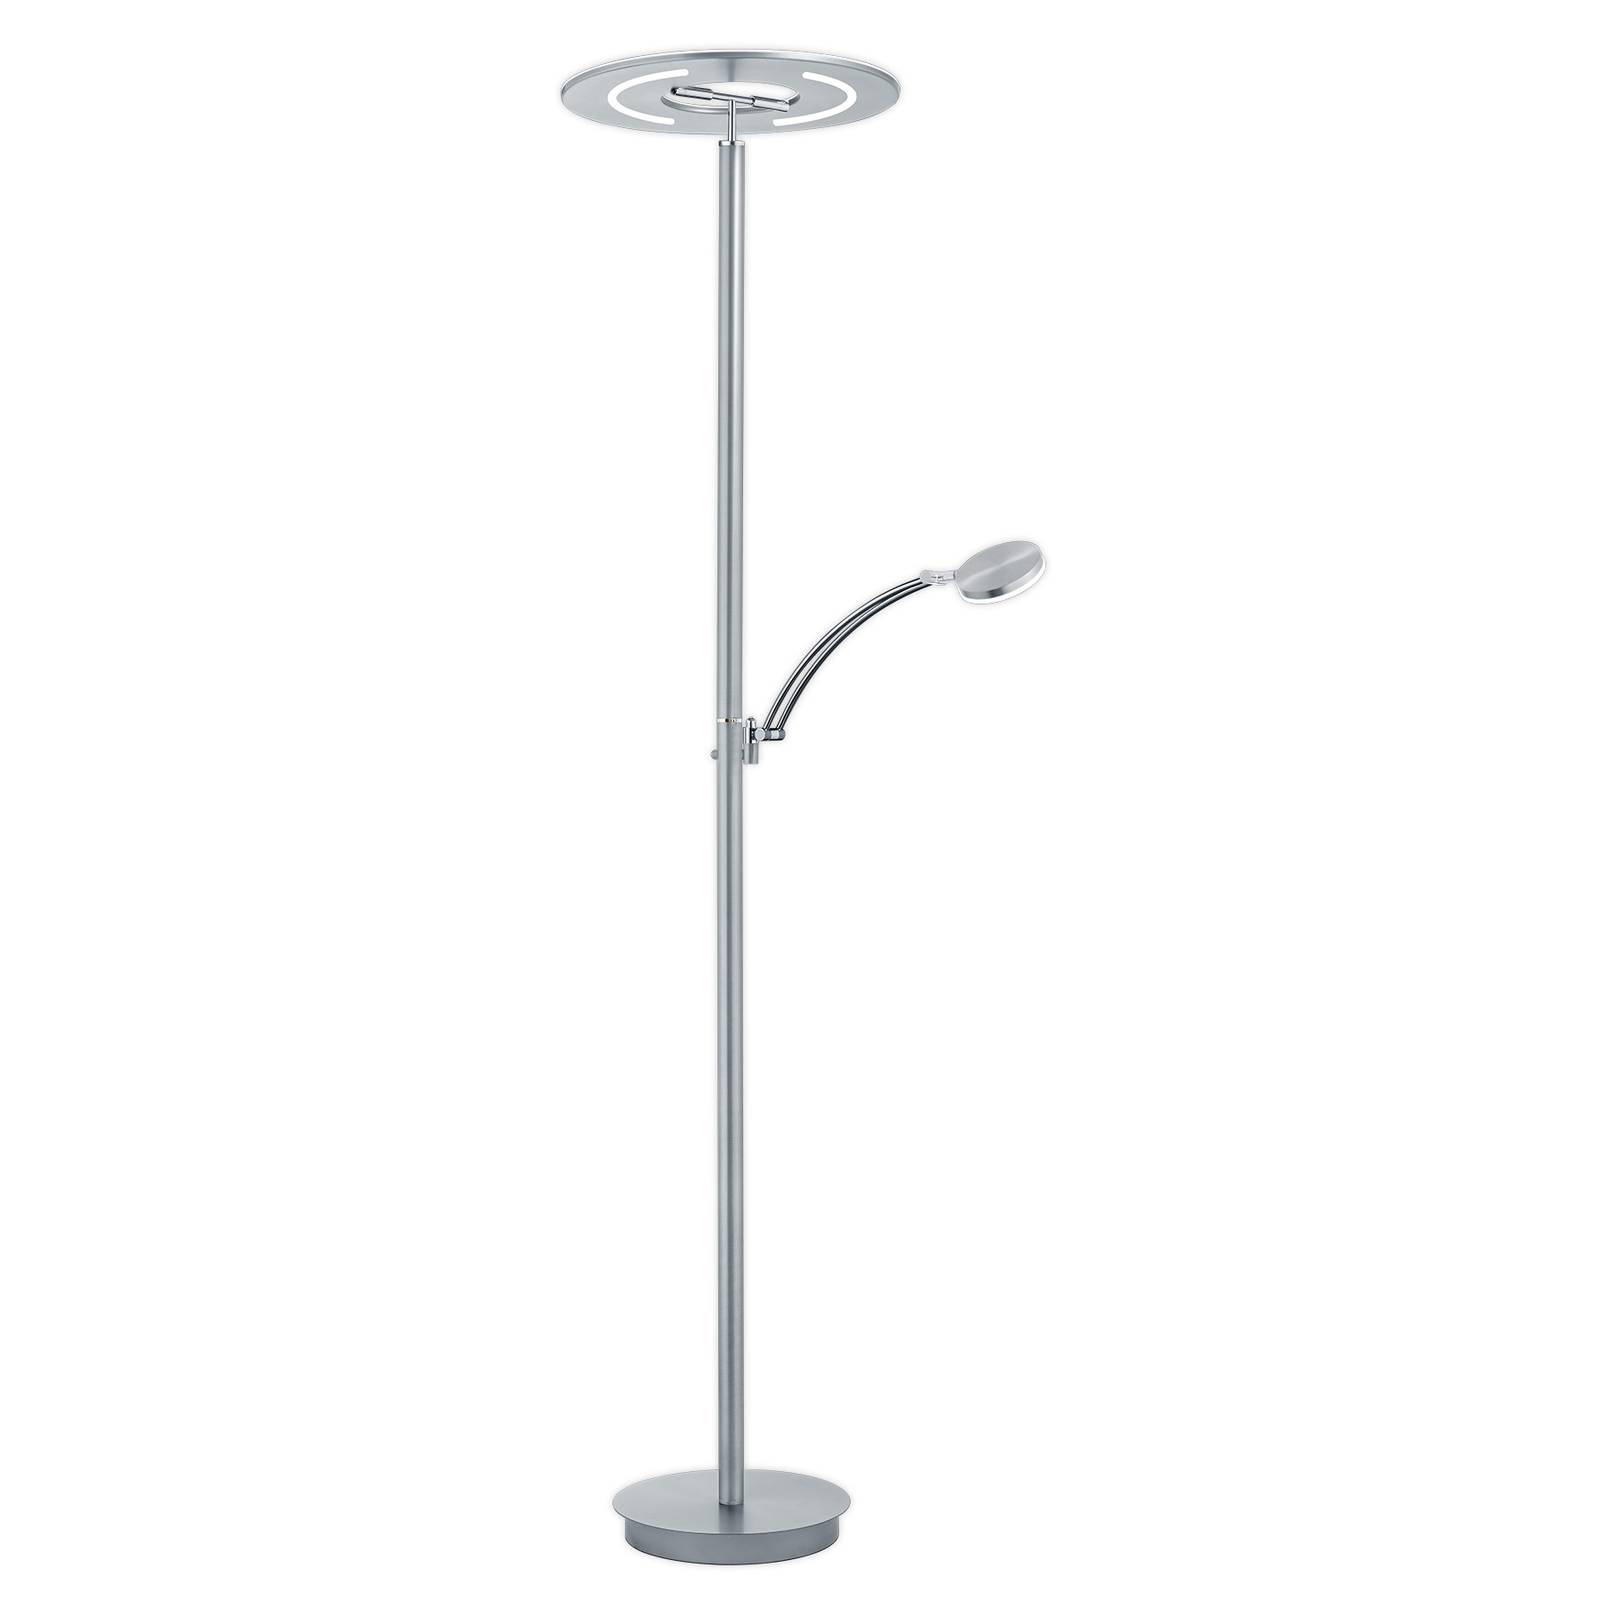 HELL LED-Stehleuchte Monti aus Nickel, Leselampe, CCT